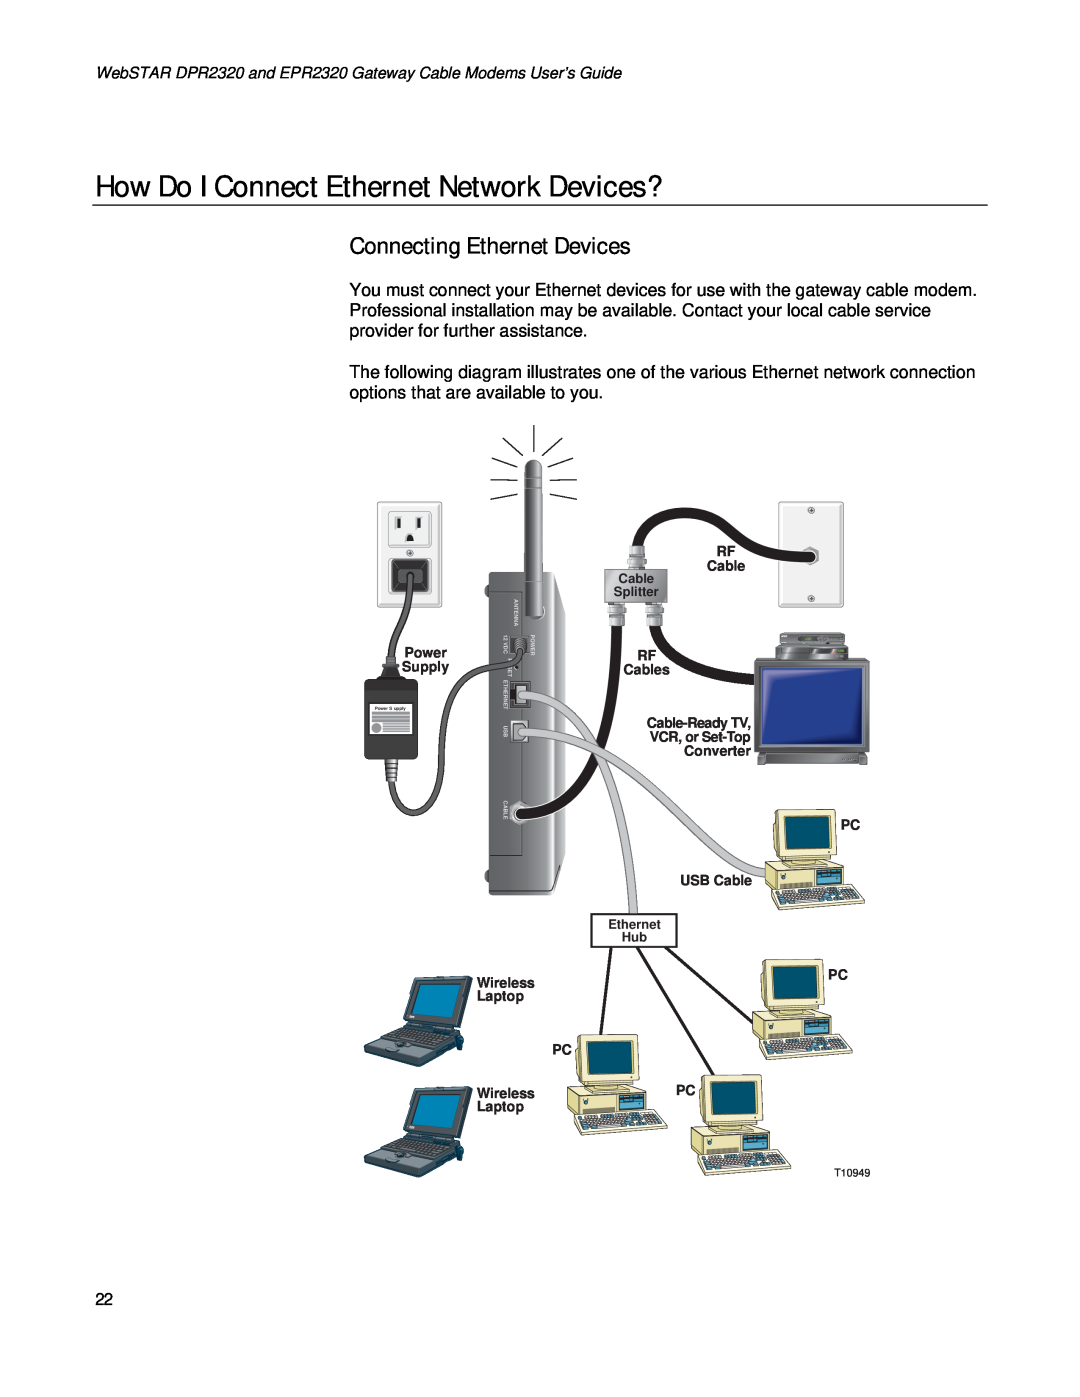 Apple DPR2320TM, EPR2320TM manual How Do I Connect Ethernet Network Devices?, Connecting Ethernet Devices 